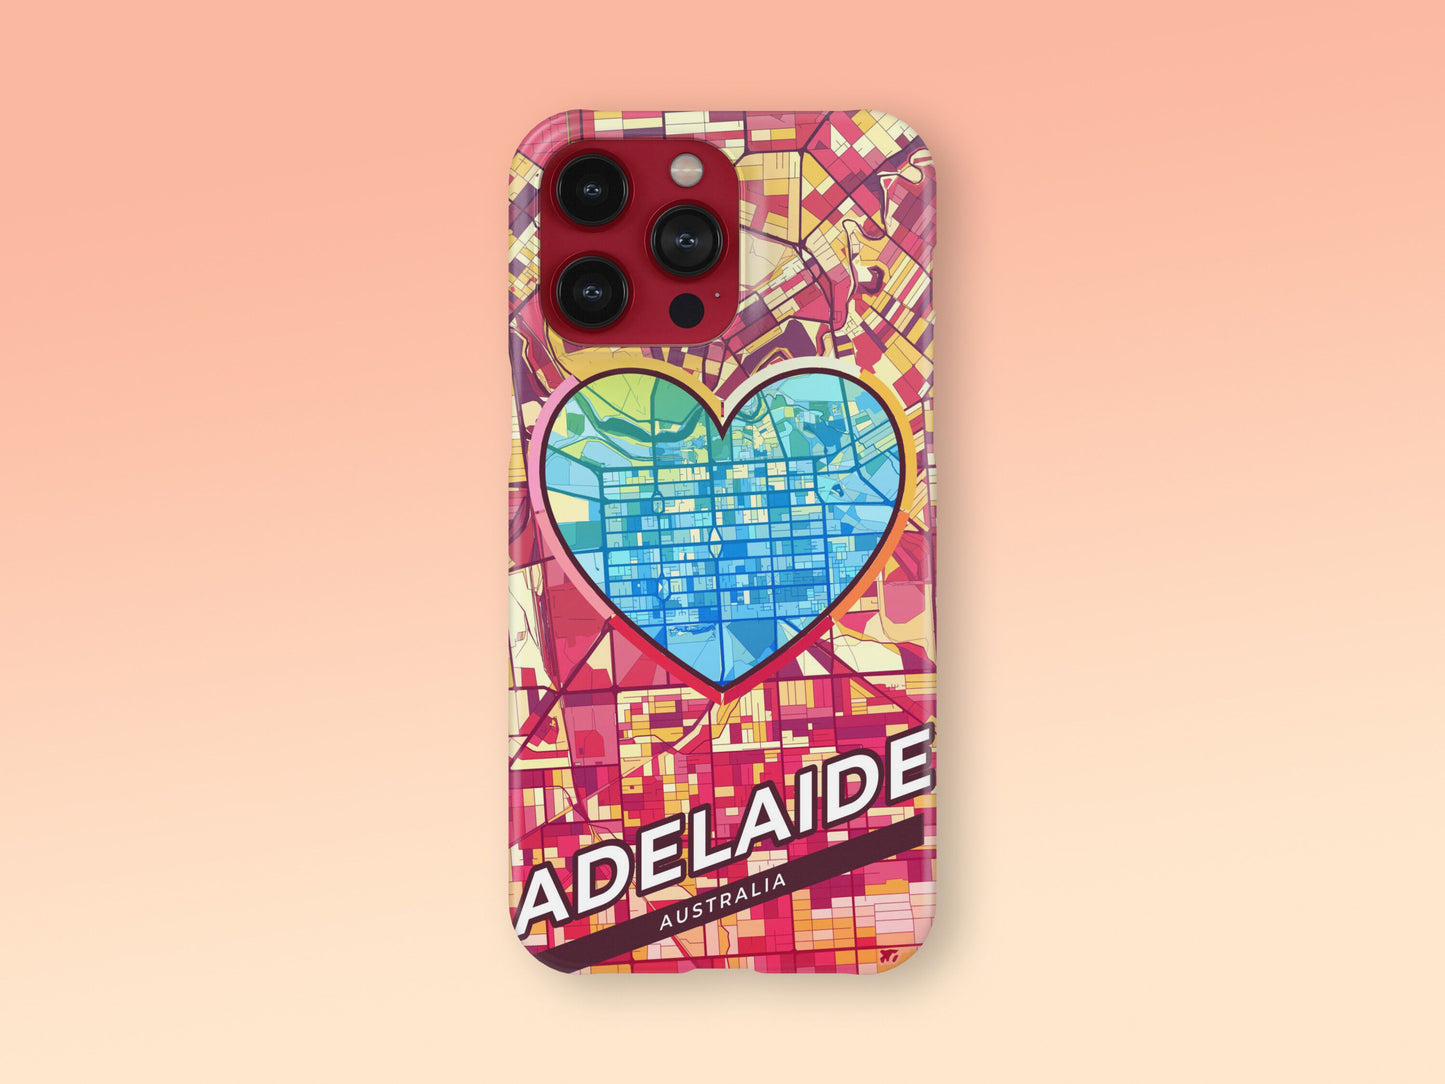 Adelaide Australia slim phone case with colorful icon. Birthday, wedding or housewarming gift. Couple match cases. 2